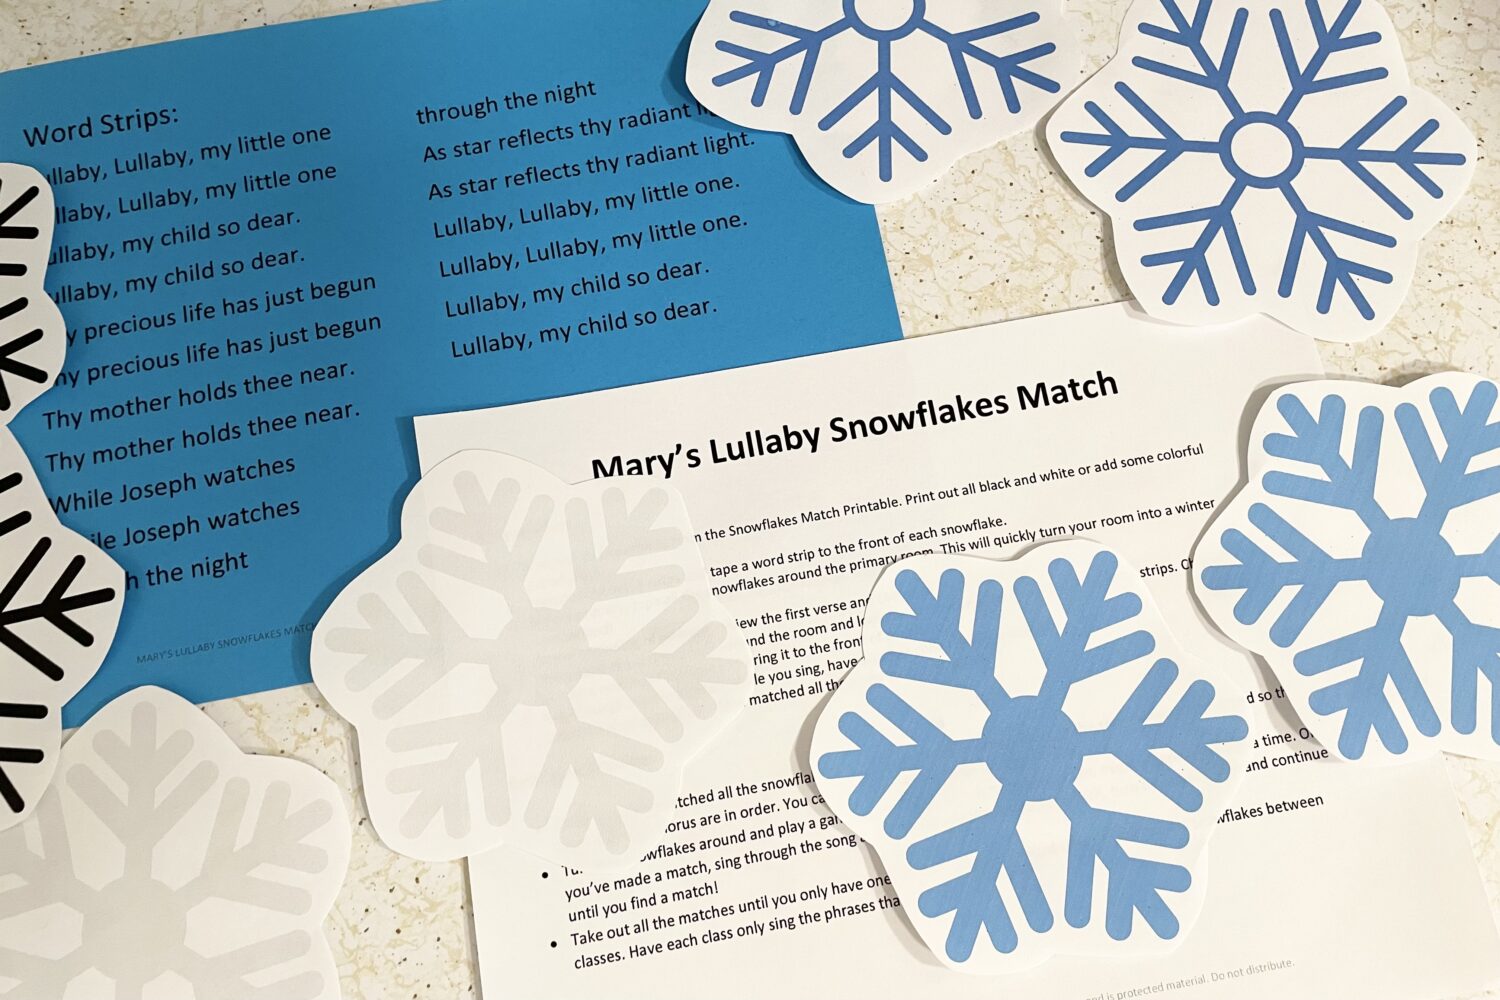 Mary's Lullaby Snowflakes Match Easy ideas for Music Leaders IMG 7708